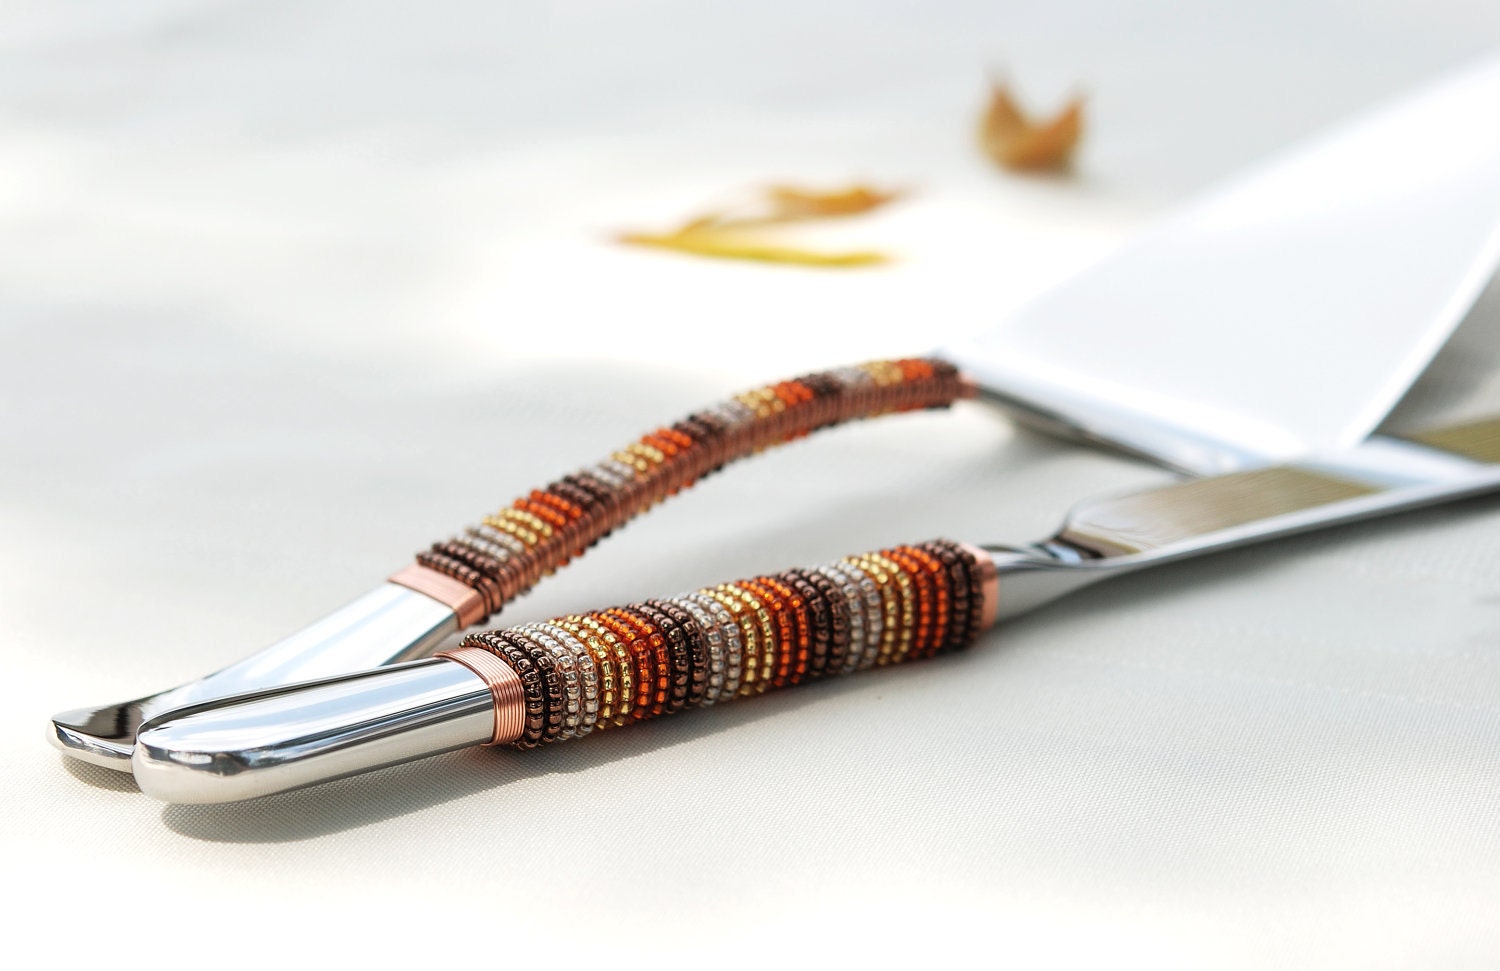 FALL Wedding Cake Server And Knife Set Hand Beaded In Autumn Harvest Brown